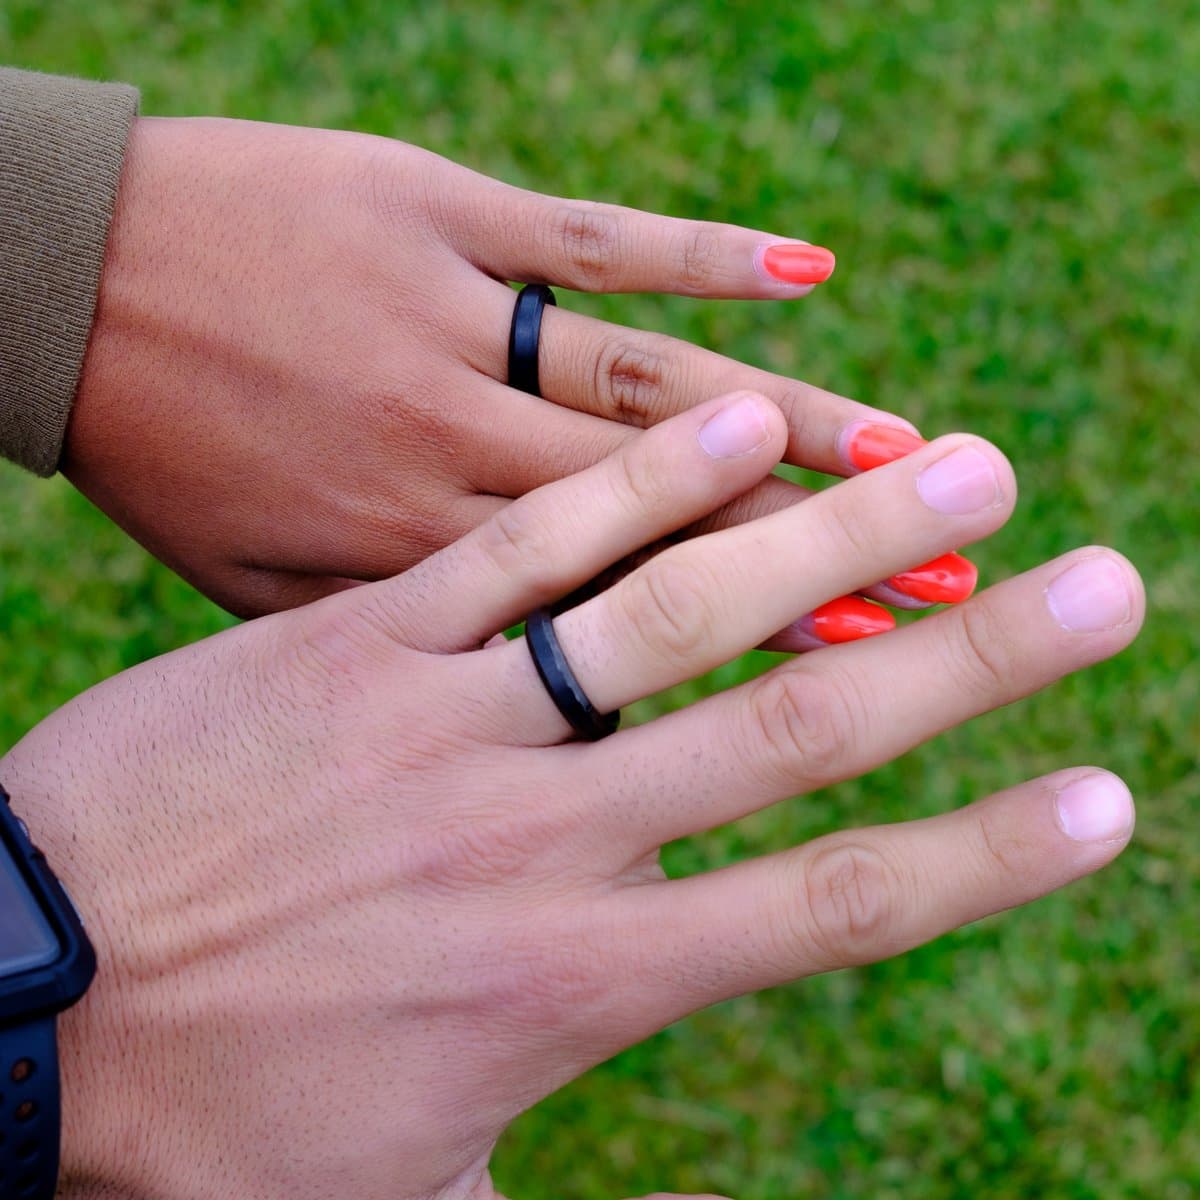 couples wearing the infinity wedding ring